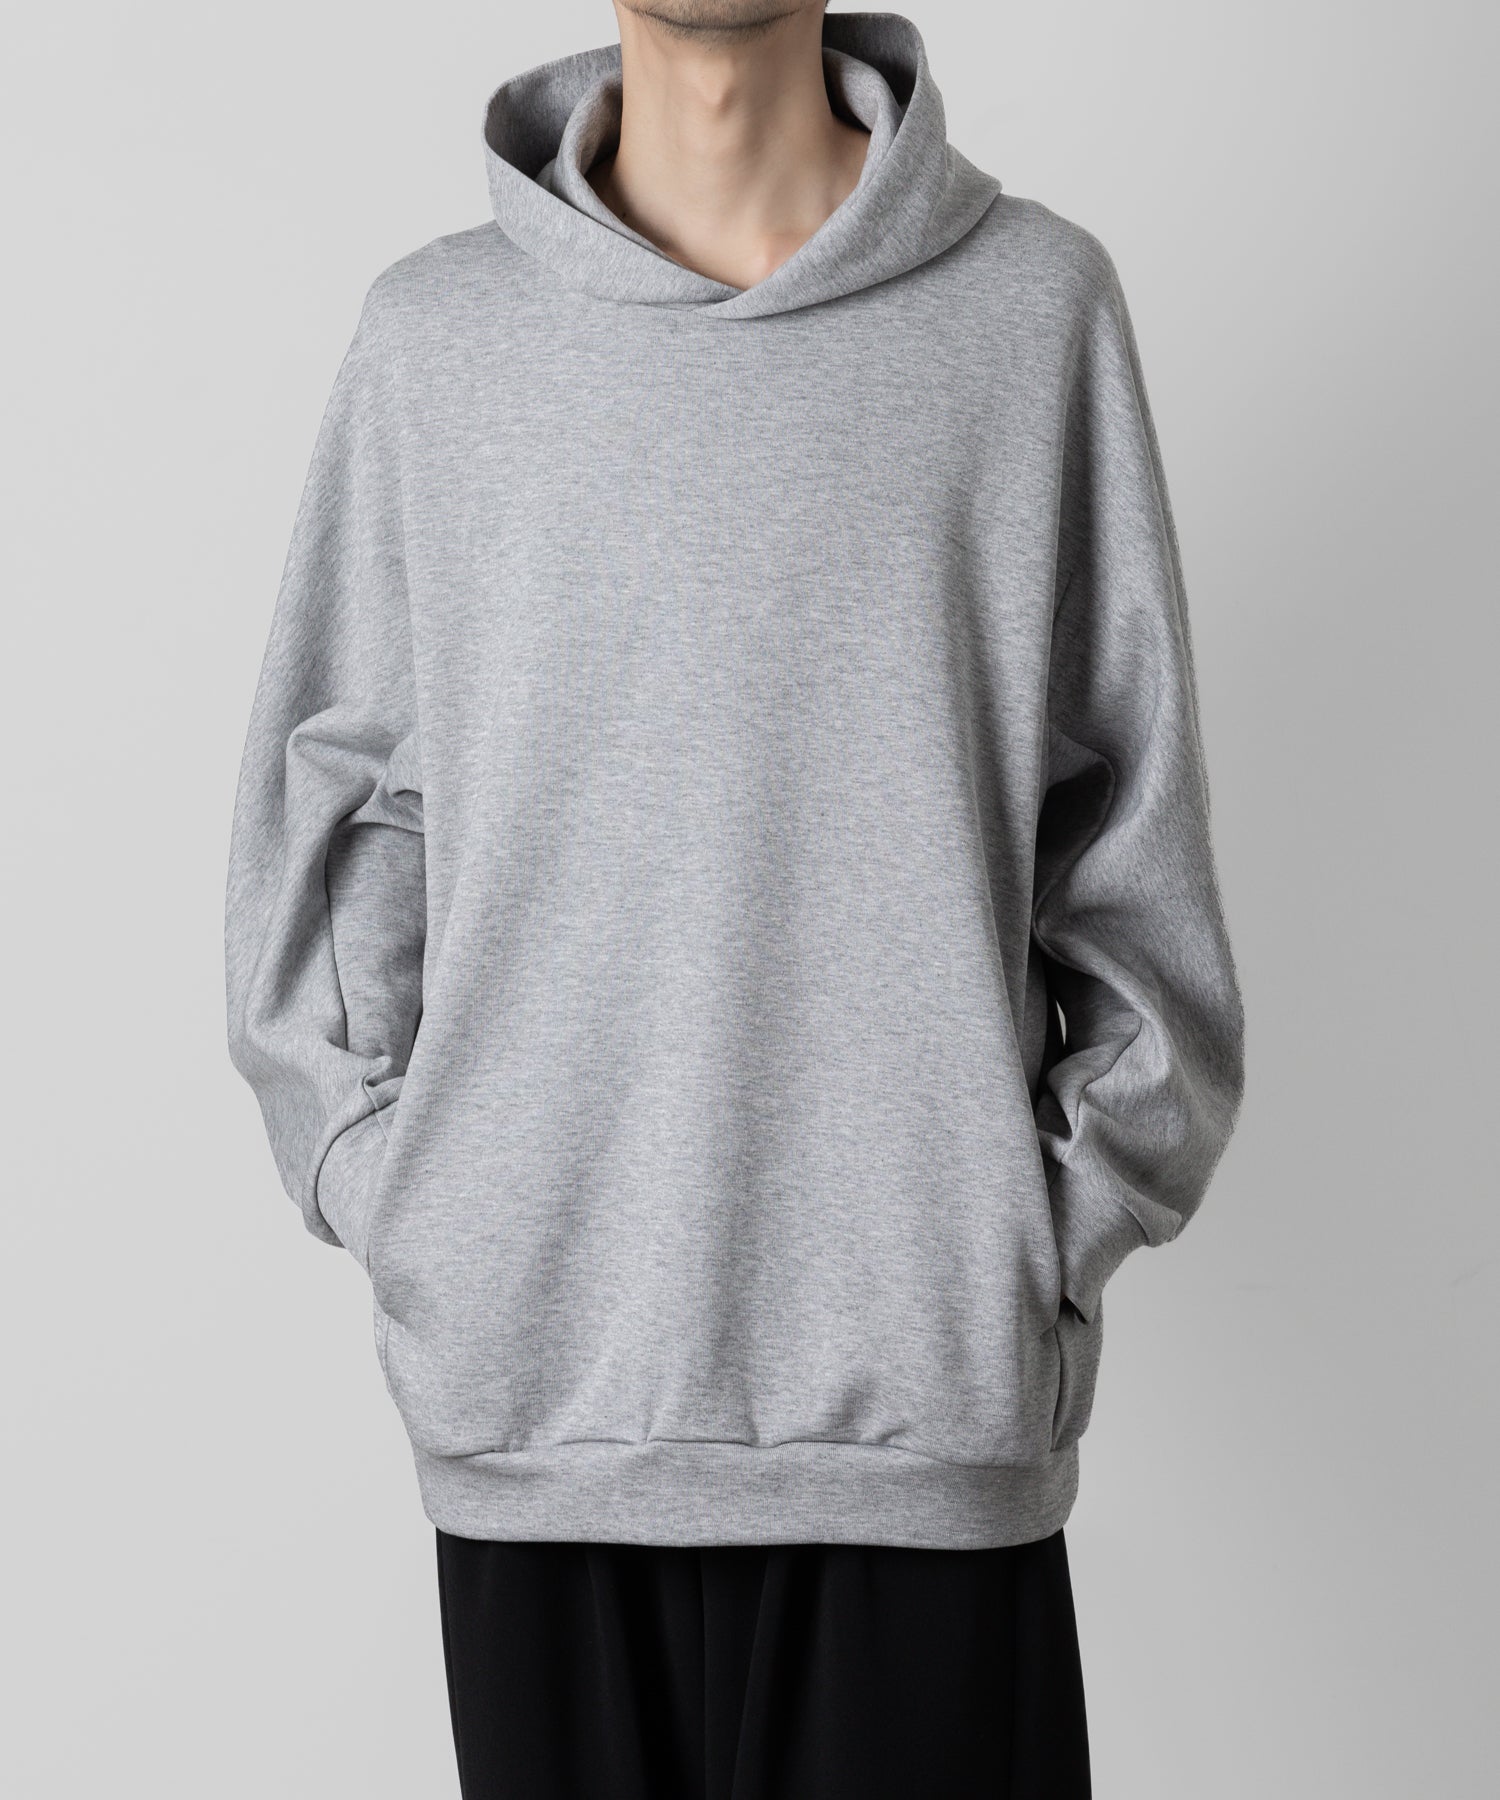 【ATTACHMENT】ATTACHMENT アタッチメントのCO/PE DOUBLE KNIT HOODIE - X.GRAY 公式通販サイトsession福岡セレクトショップ